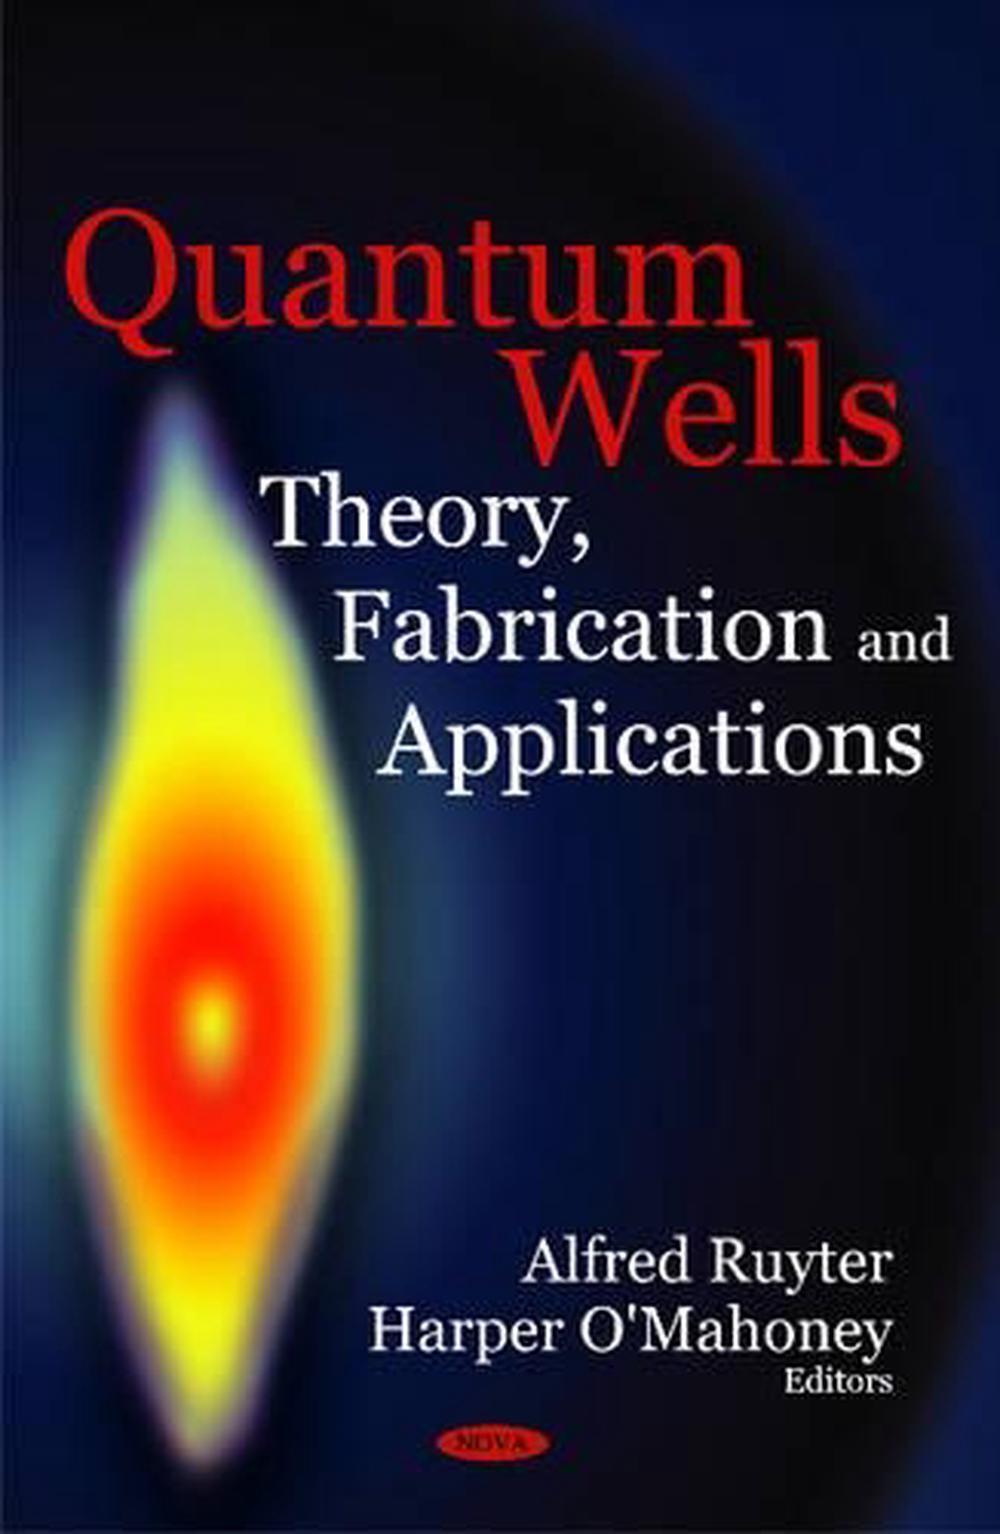 Quantum Wells: Theory, Fabrication & Applications by Alfred Ruyter (English) Har